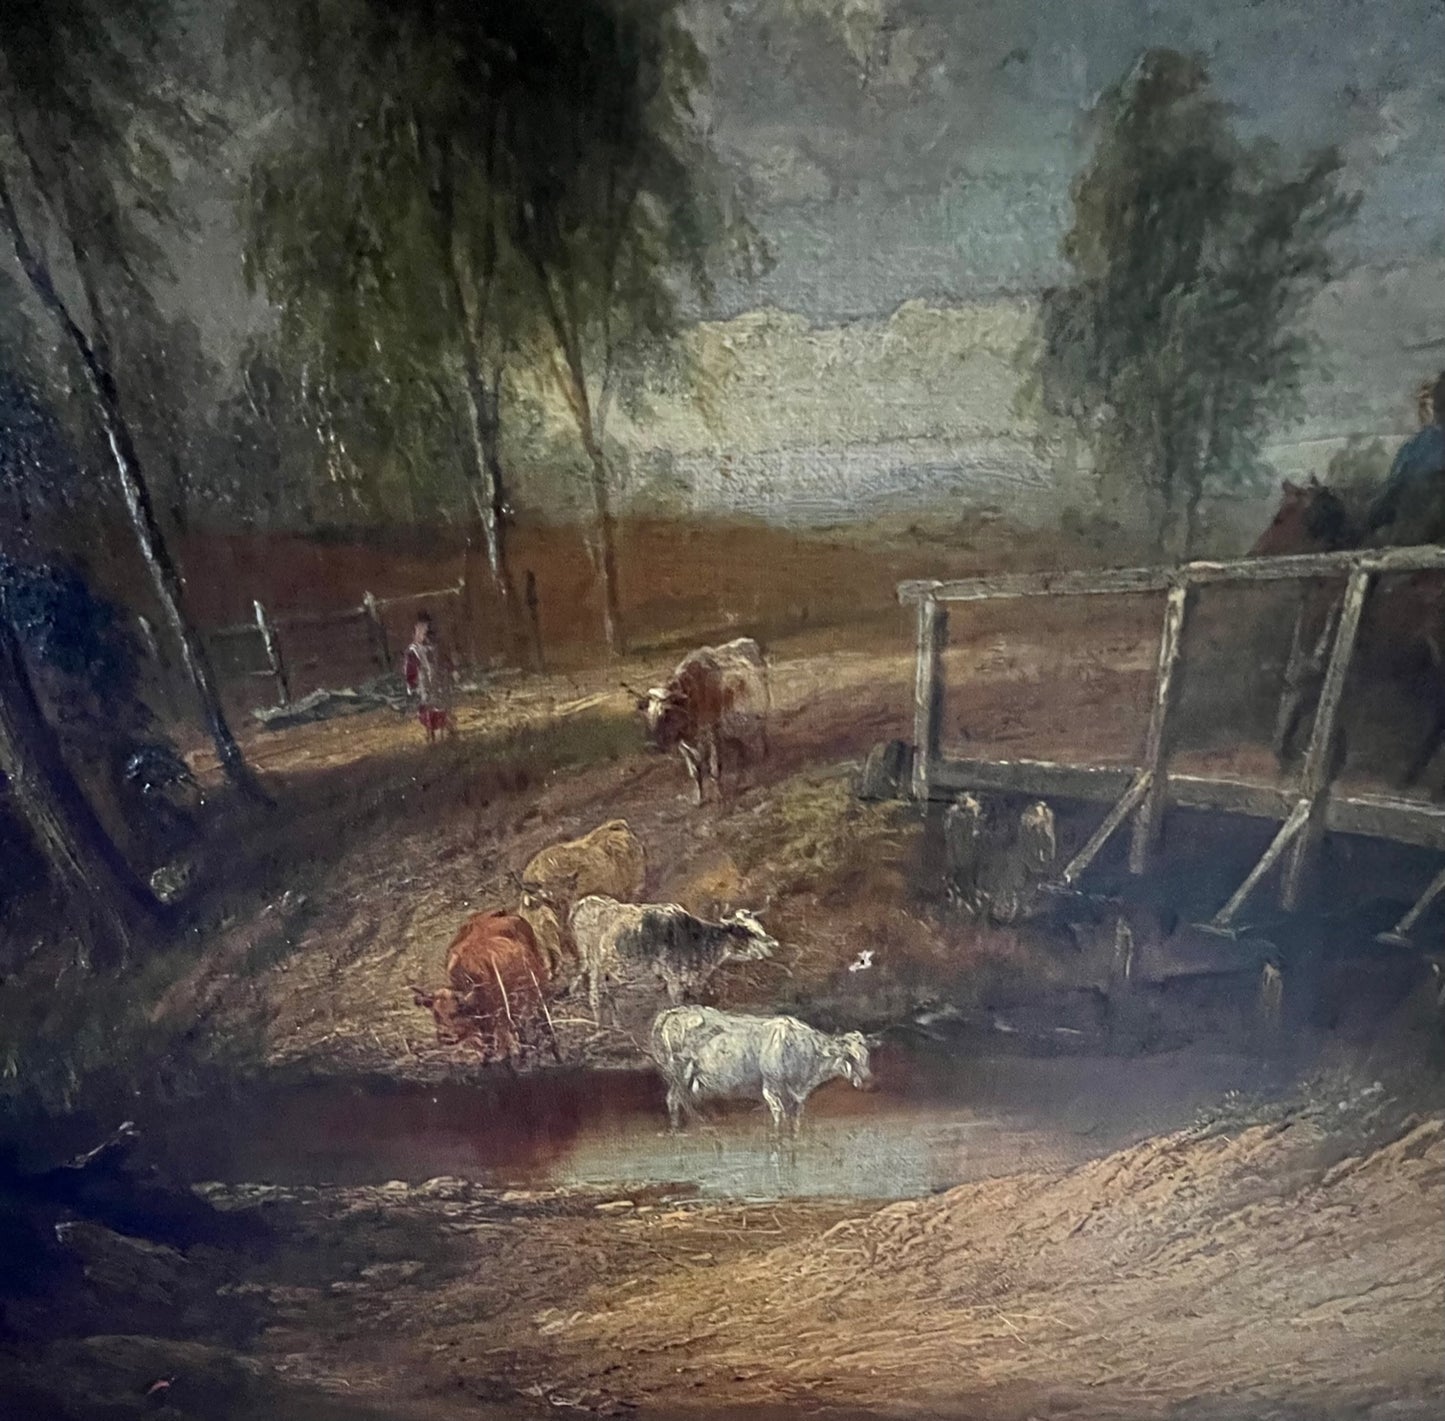 Early 19th Century Oil on Canvas - Bridge over river with Cattle possibly Norwich School